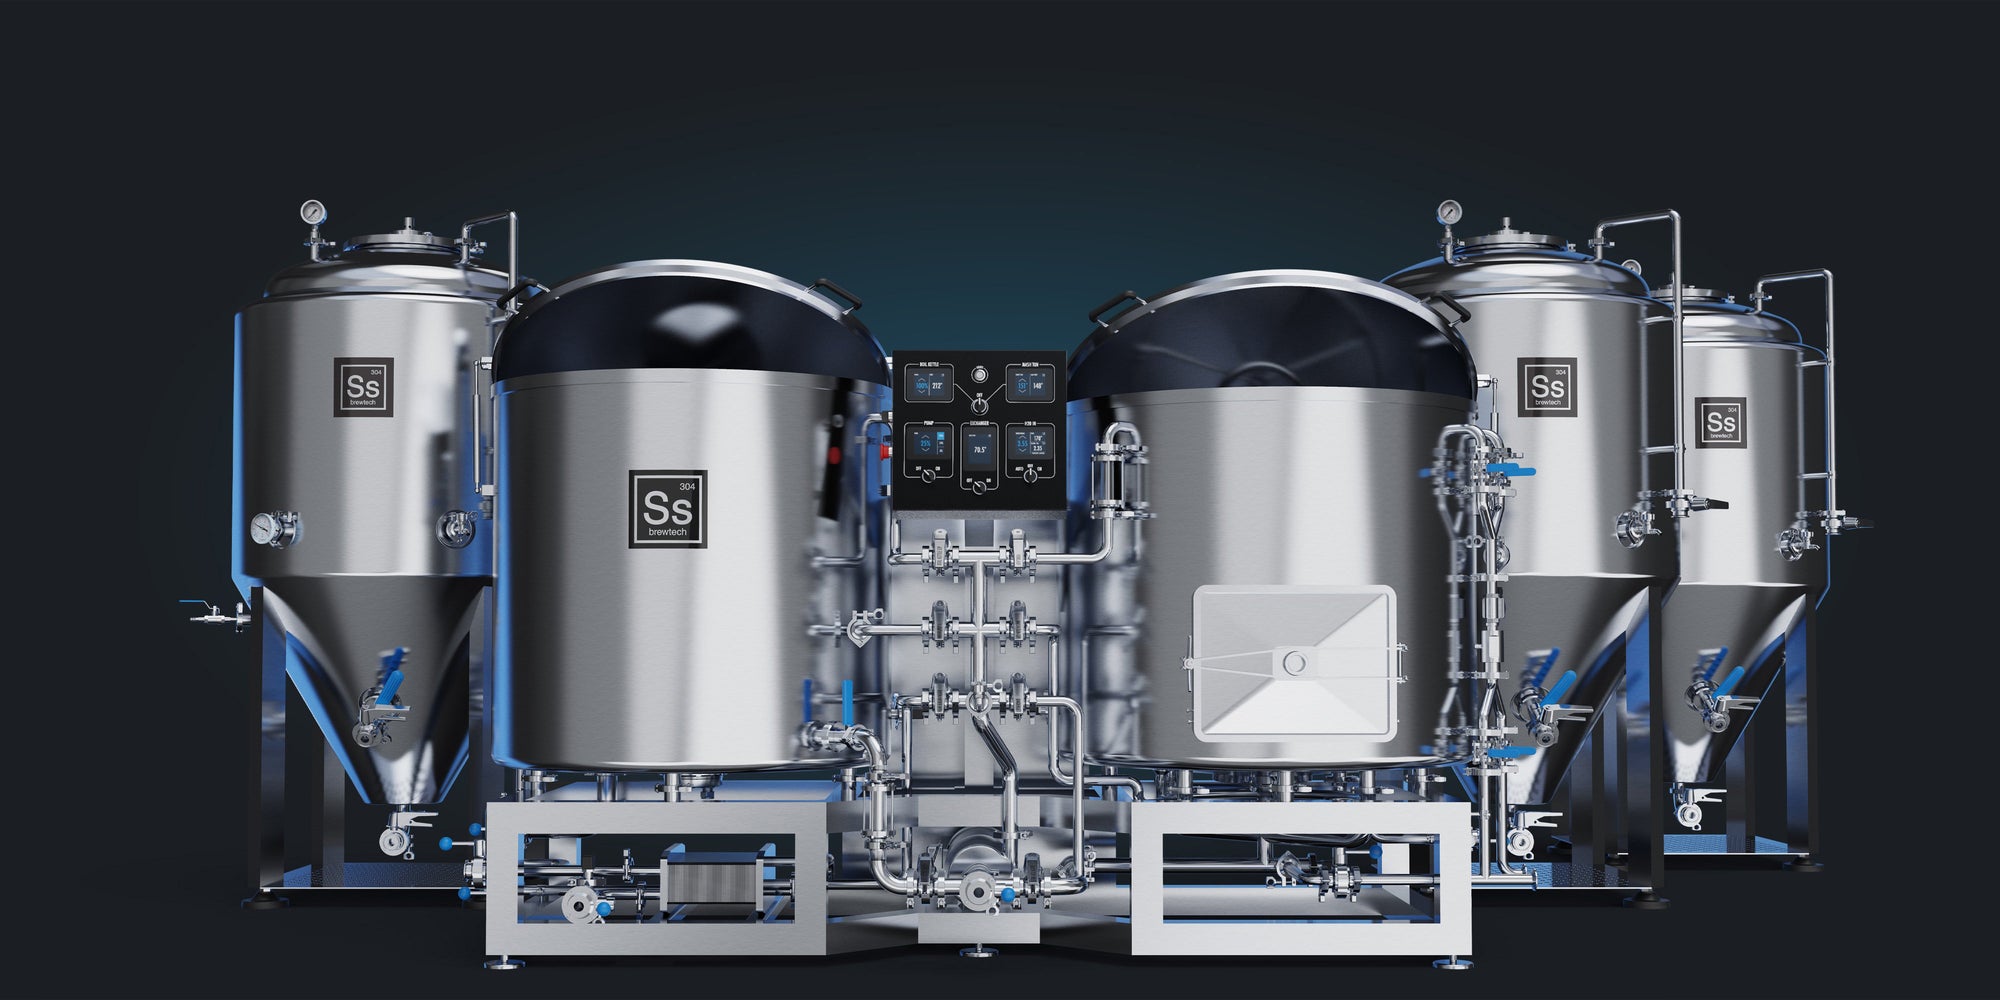 Product Photo of Ss Brewtech 3.5 Bbl Nano Electric Brewhouse in the center, surrounded by three Ss Brewtech 3.5 Bbl Nano Jacketed Unitanks